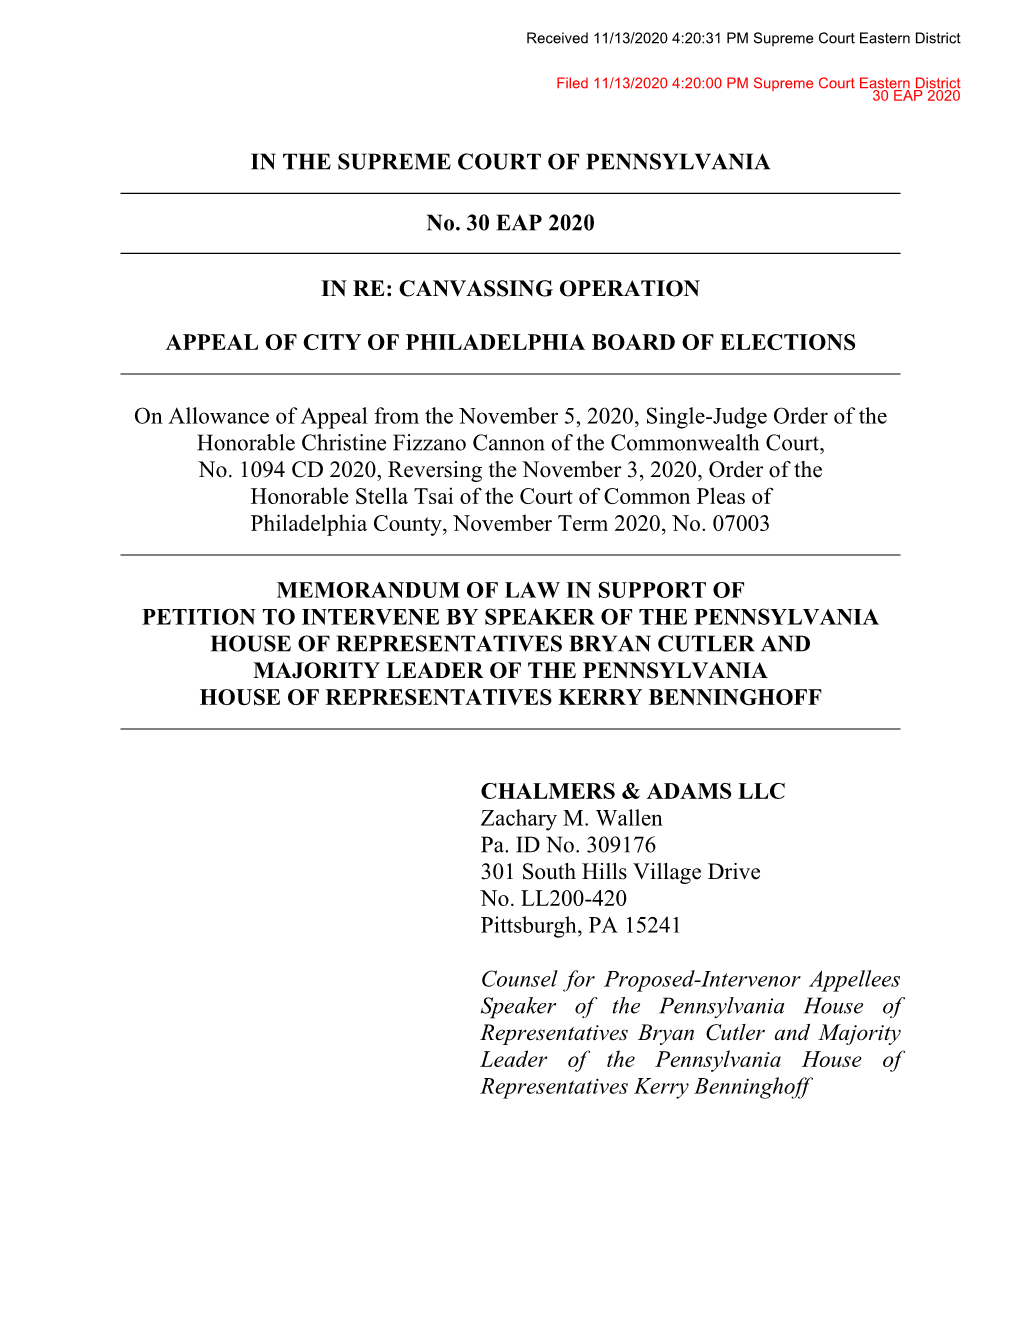 IN the SUPREME COURT of PENNSYLVANIA No. 30 EAP 2020 in RE: CANVASSING OPERATION APPEAL of CITY of PHILADELPHIA BOARD of ELECTIO